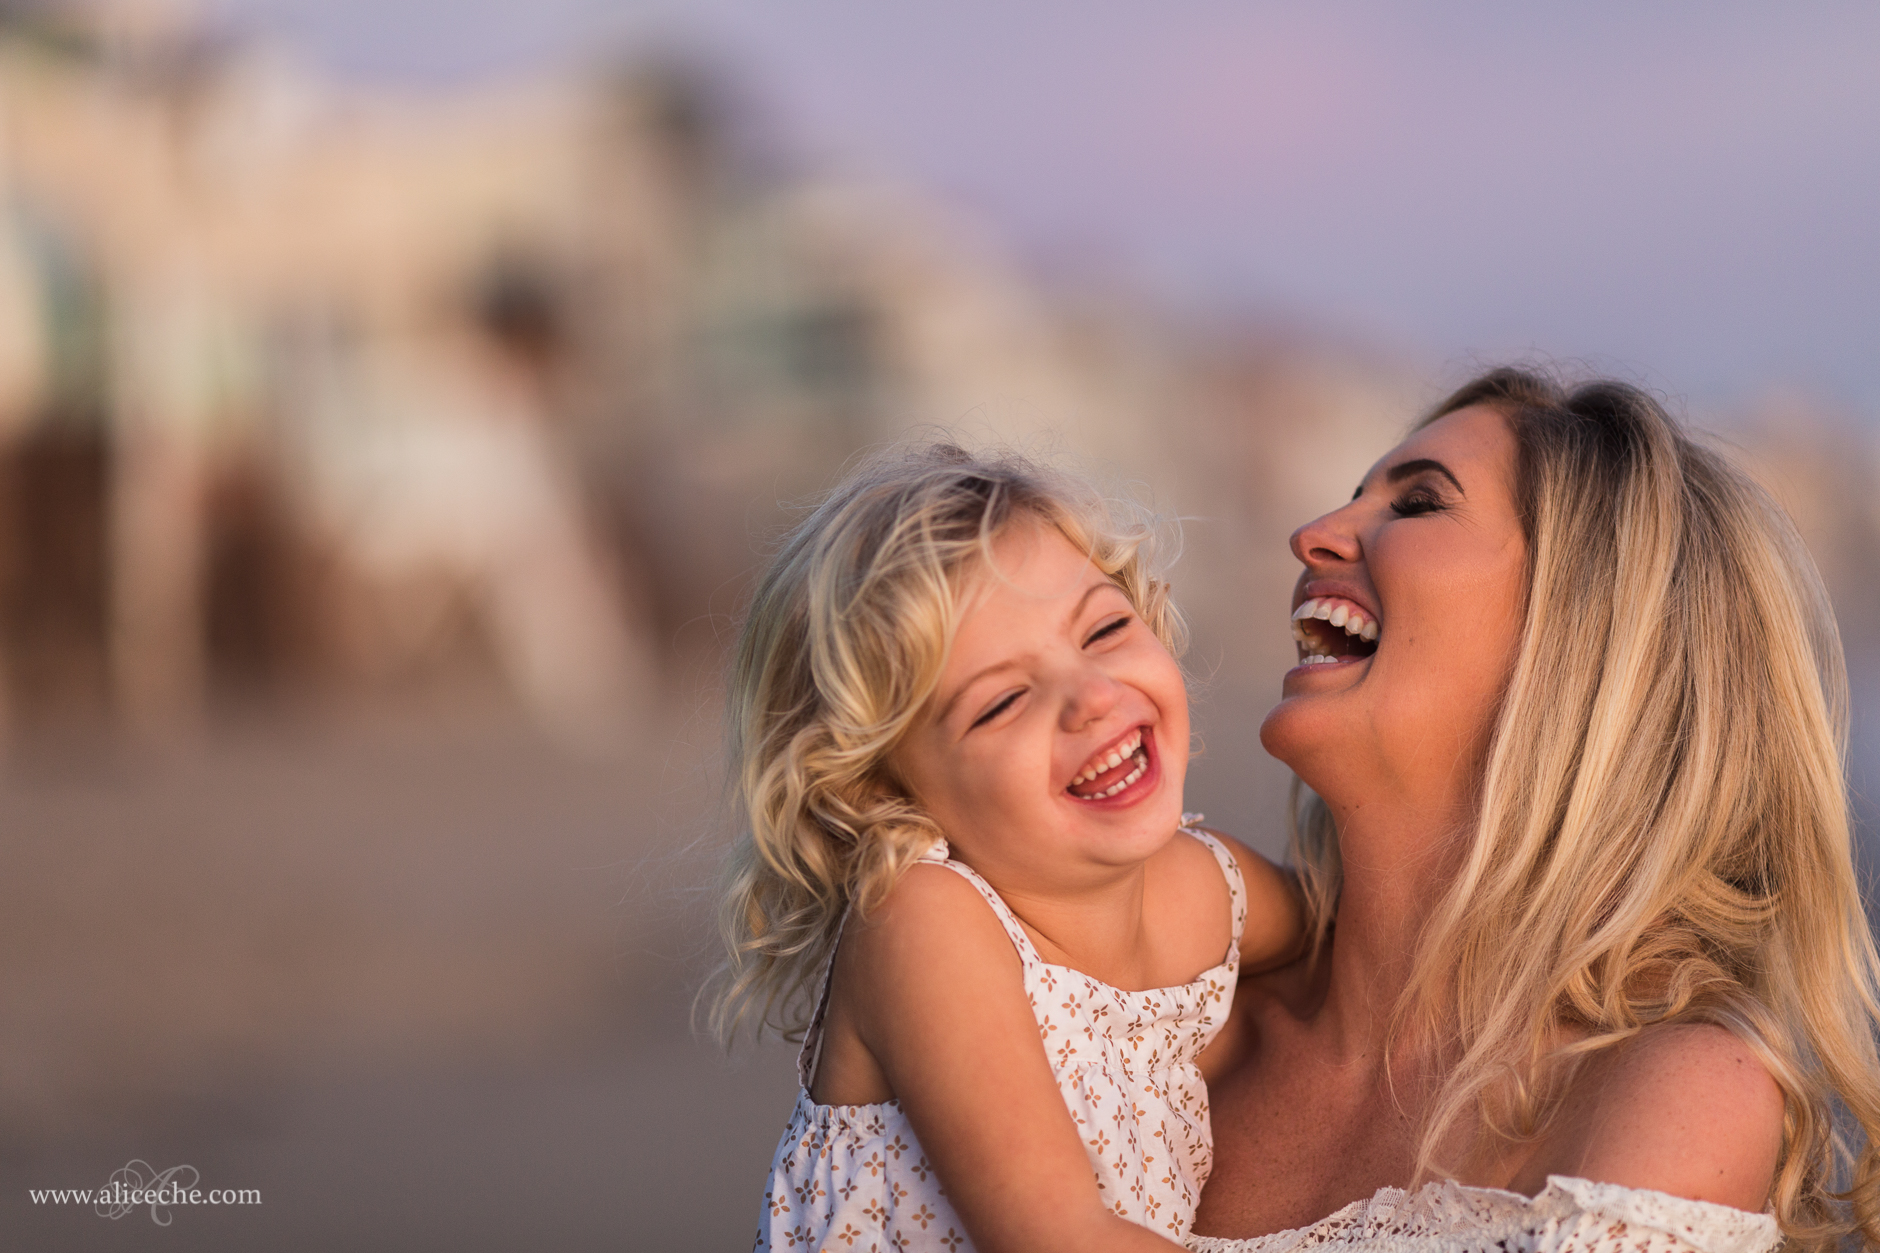 alice-che-photography-blair-thurston-retreat-malibu-family-session-laughing-mom-and-daughter-on-beach